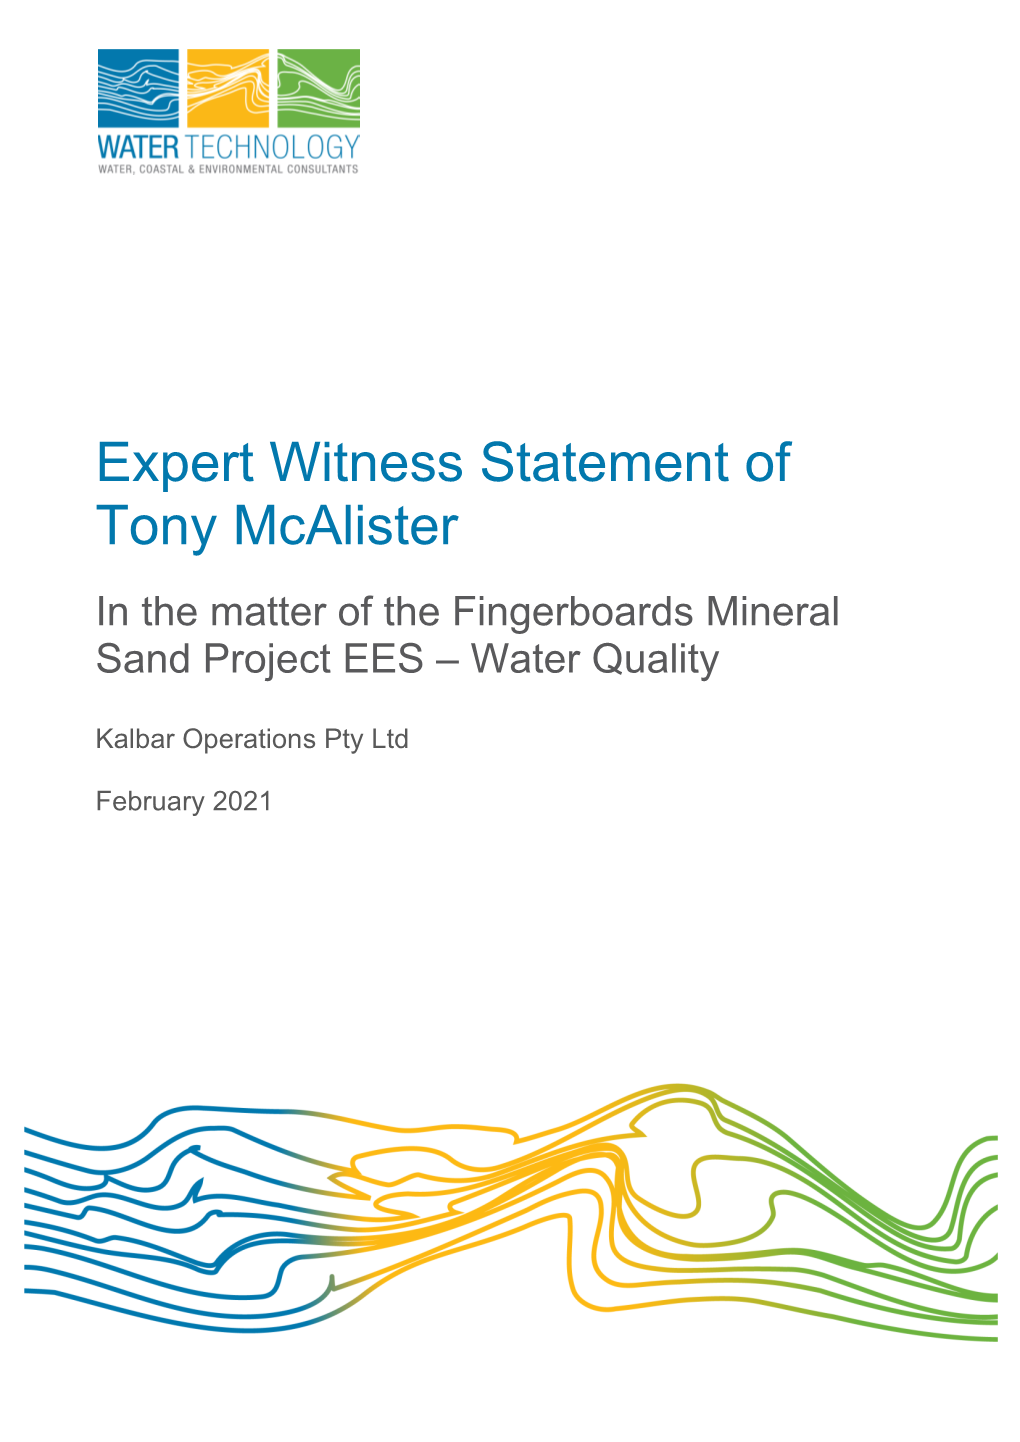 Expert Witness Statement of Tony Mcalister in the Matter of the Fingerboards Mineral Sand Project EES – Water Quality